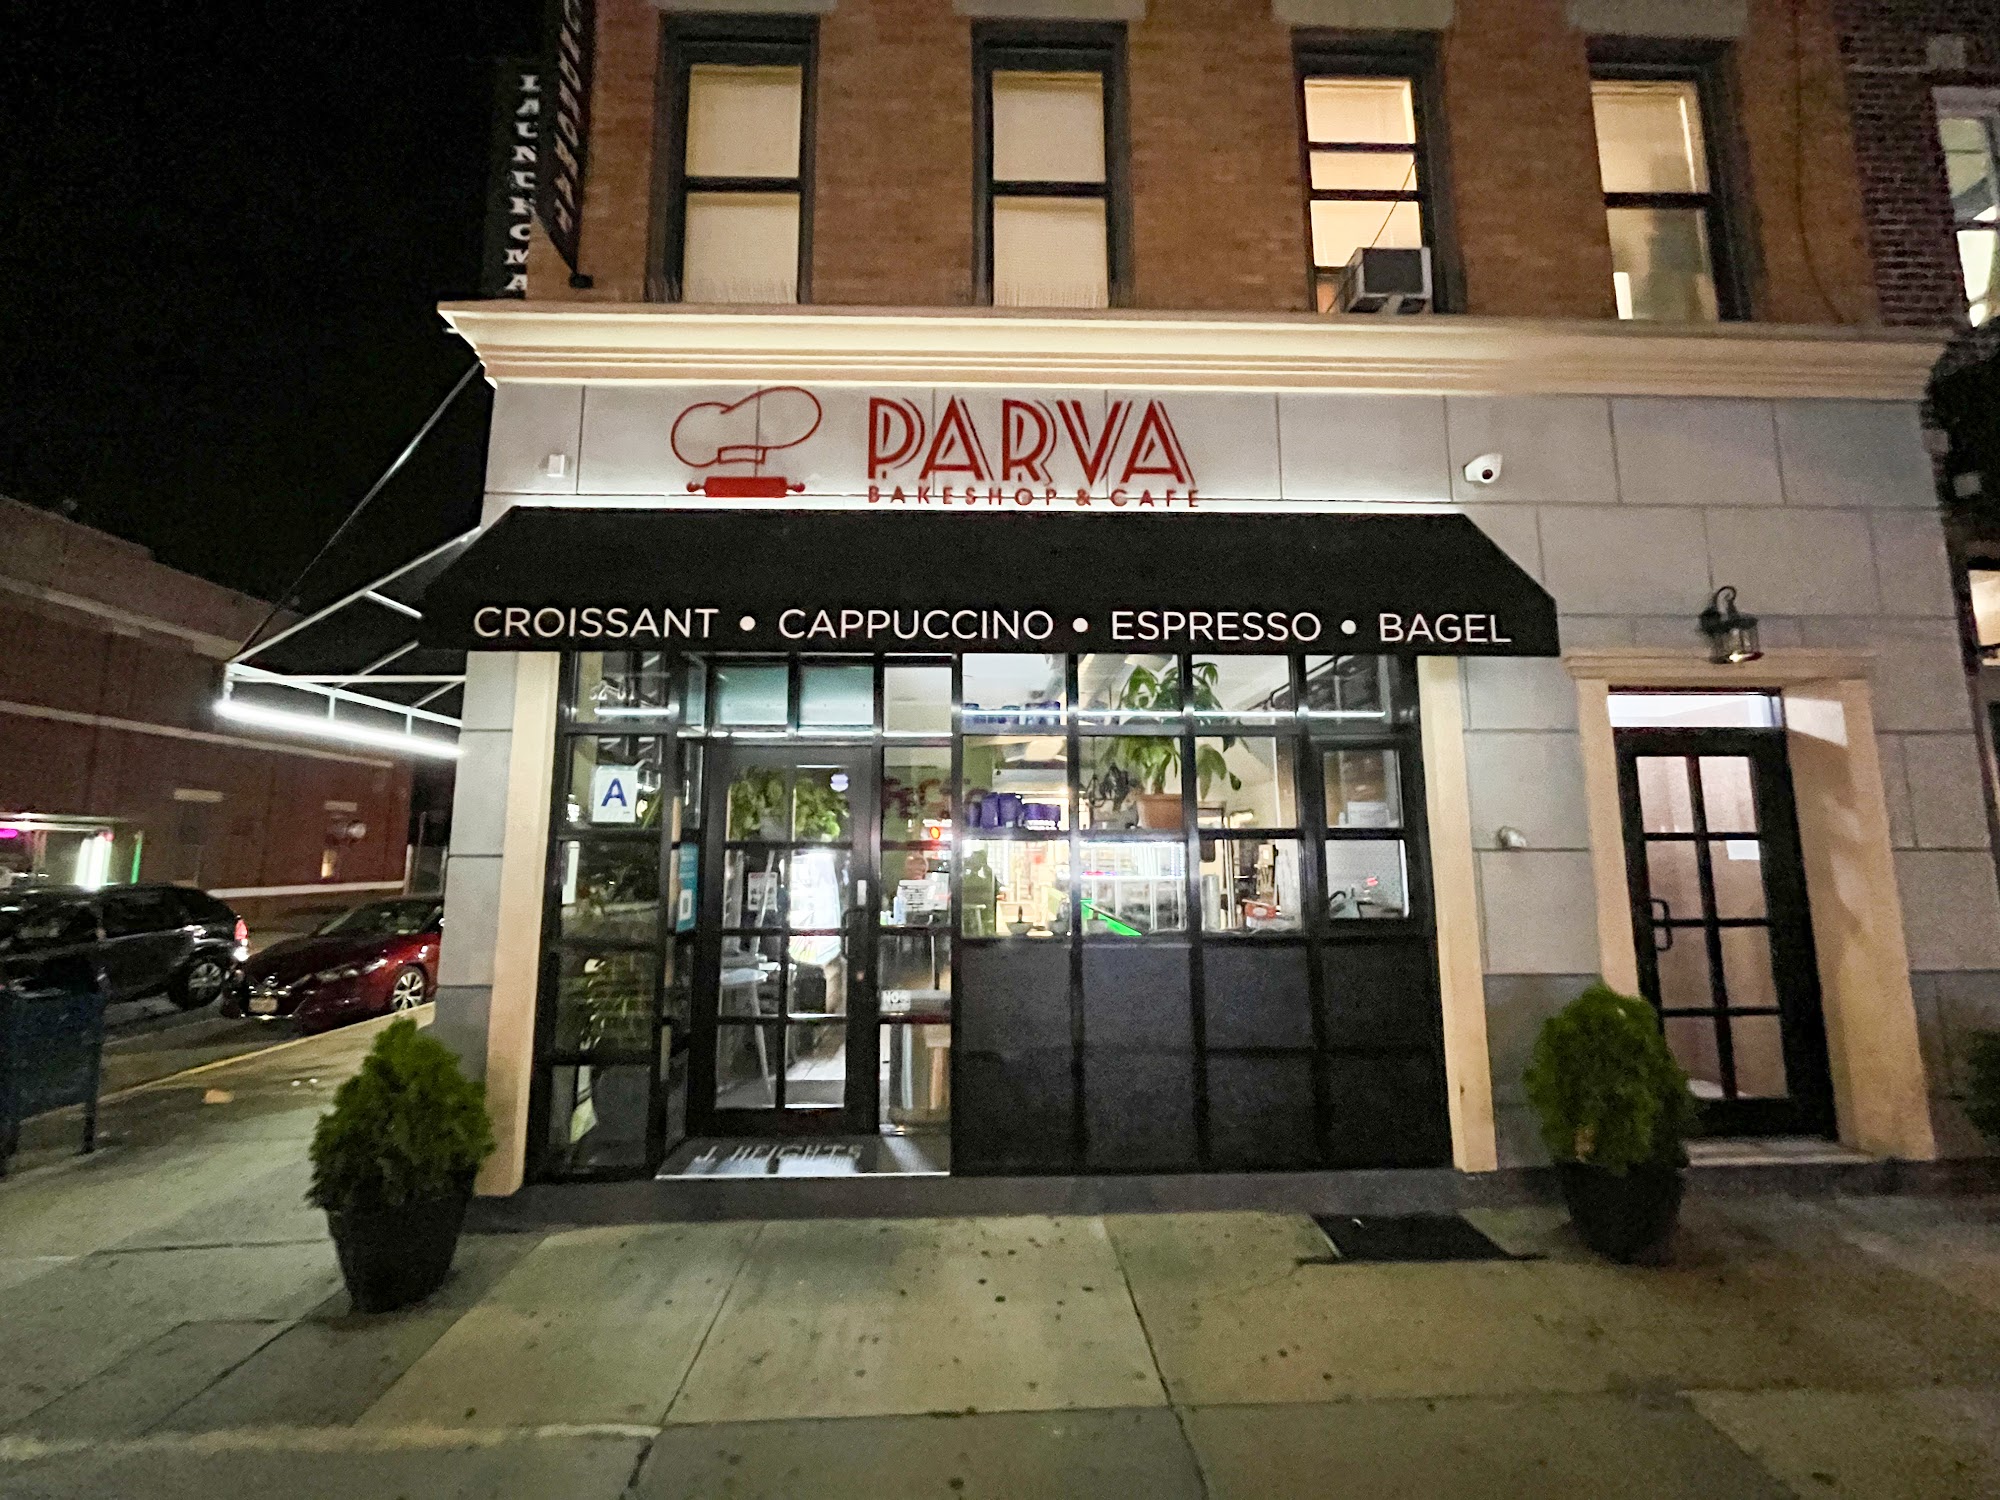 Parva Bakeshop and Cafe